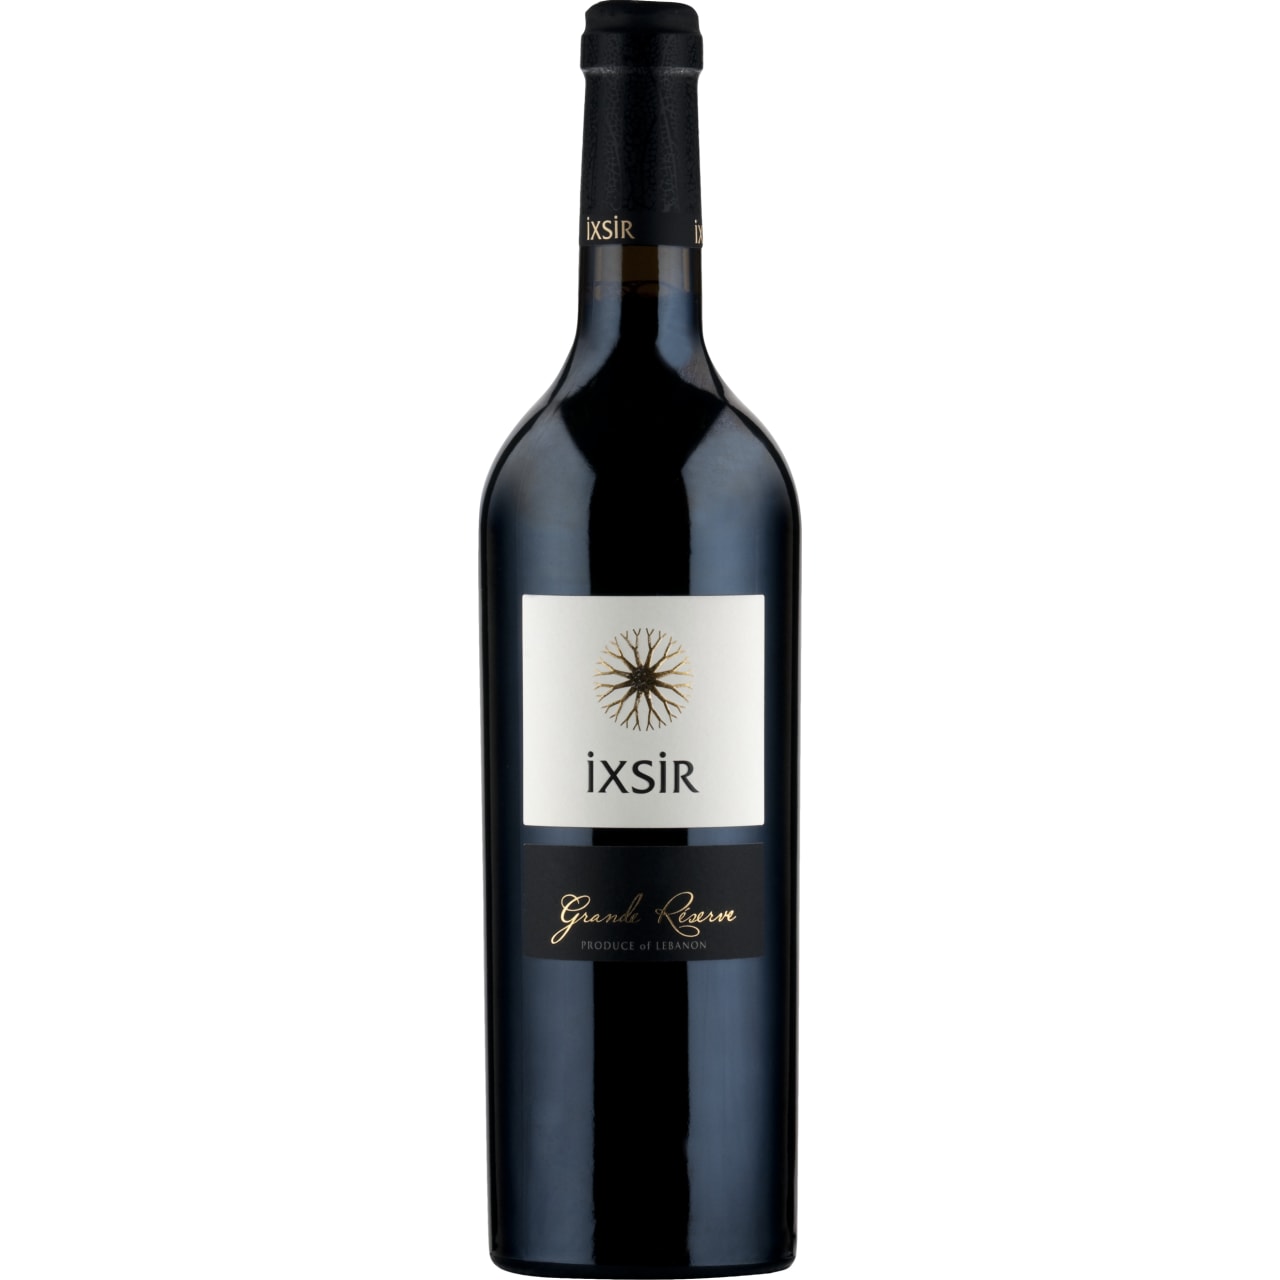 Concentrated and full with exuberant aromas of ripe fruits and spices.